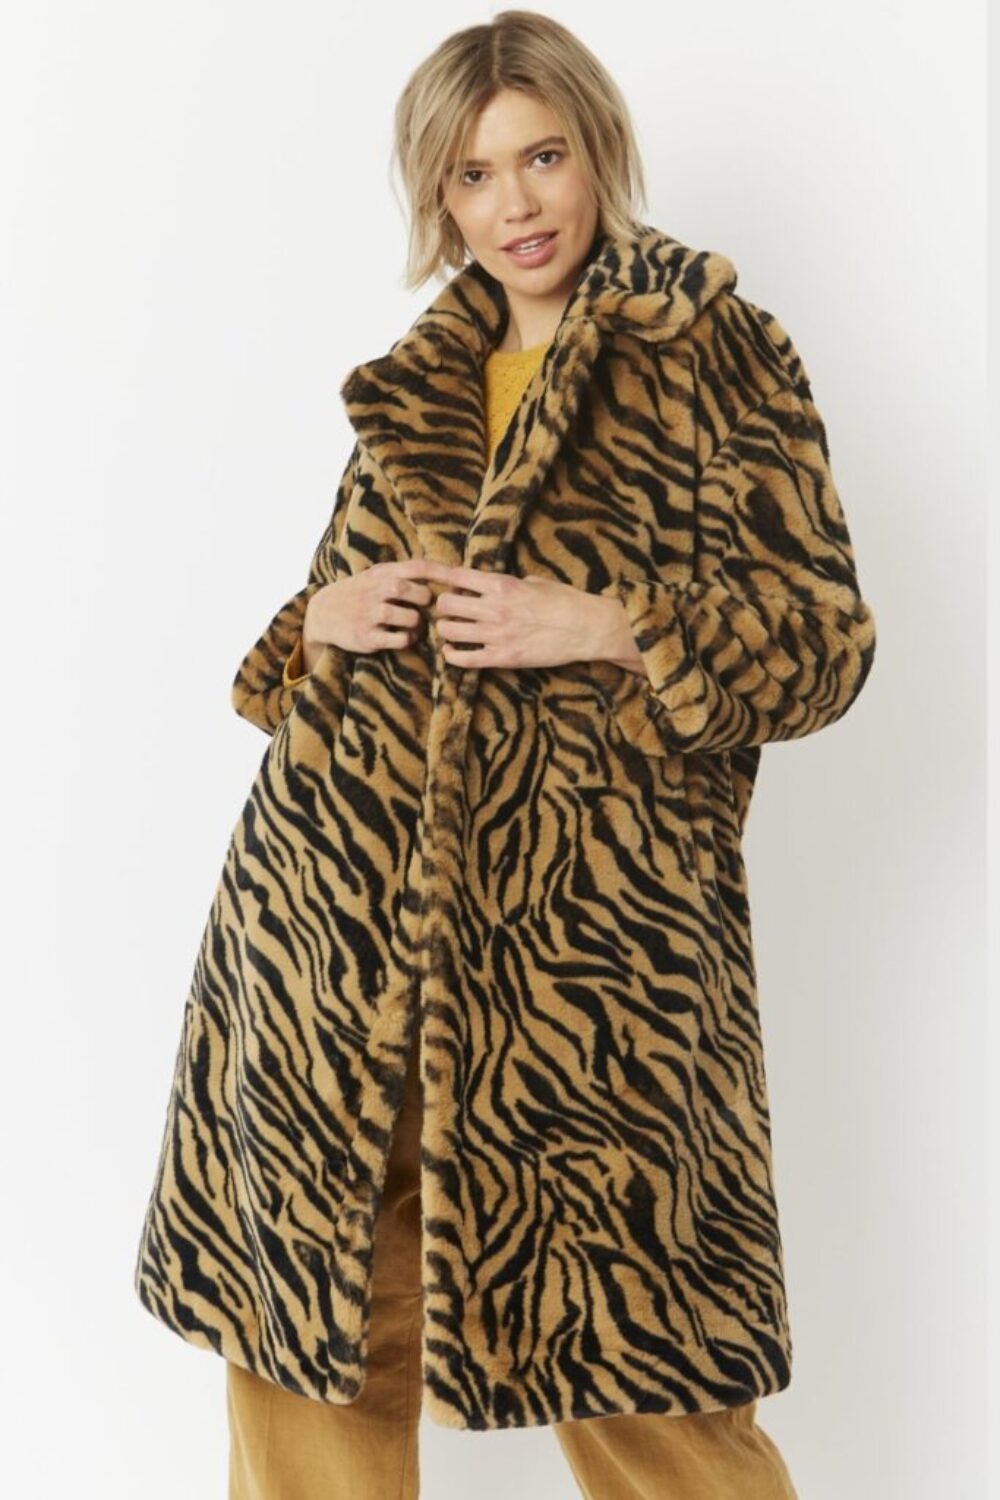 Shop Lux Animal Print Faux Fur Midi Shaved Shearling Coat and women's luxury and designer clothes at www.lux-apparel.co.uk